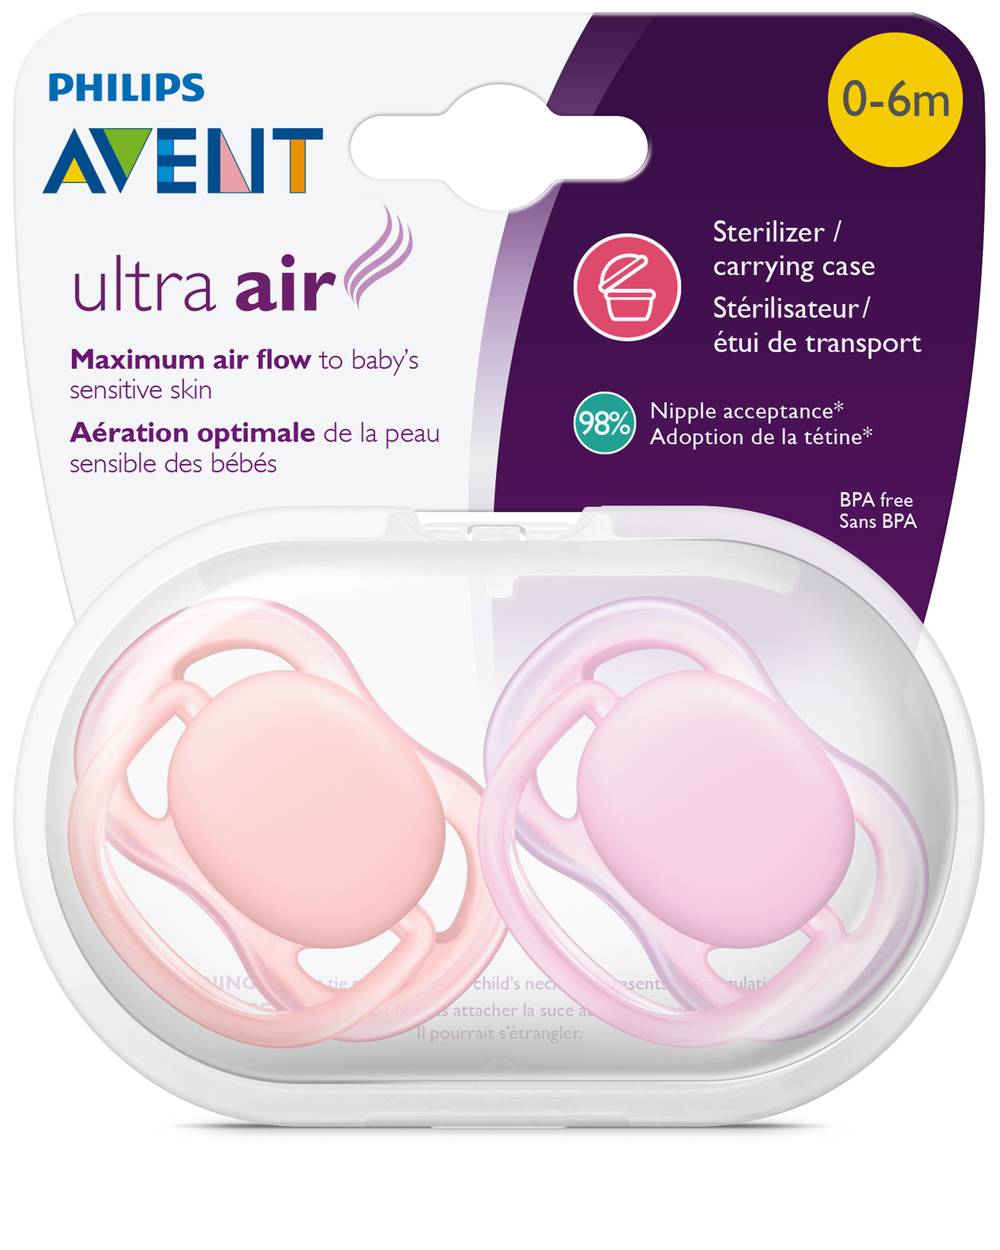 Philips Avent Ultra Air Pacifier